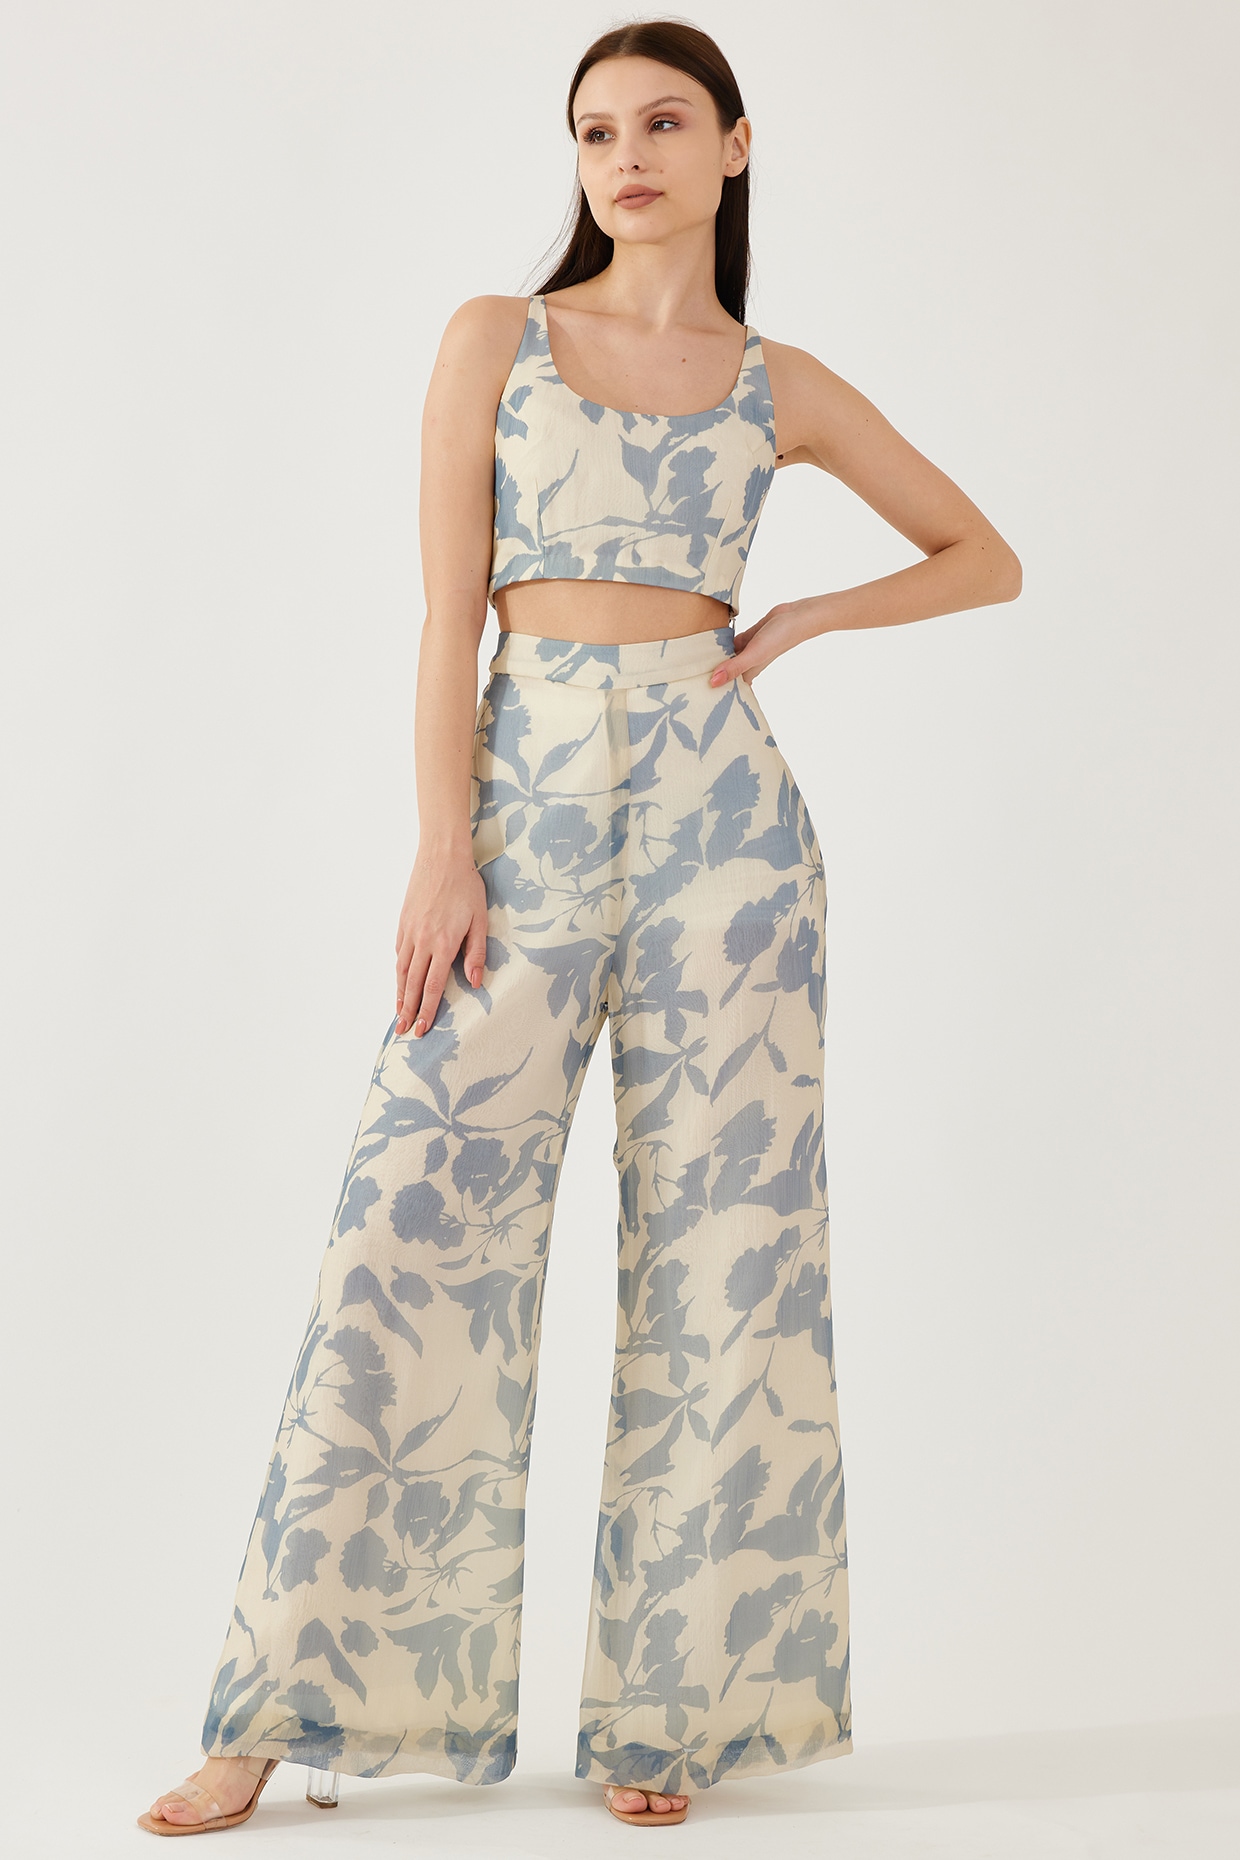 Buy White High Rise Printed CoOrd Pants For Women Online in India   VeroModa